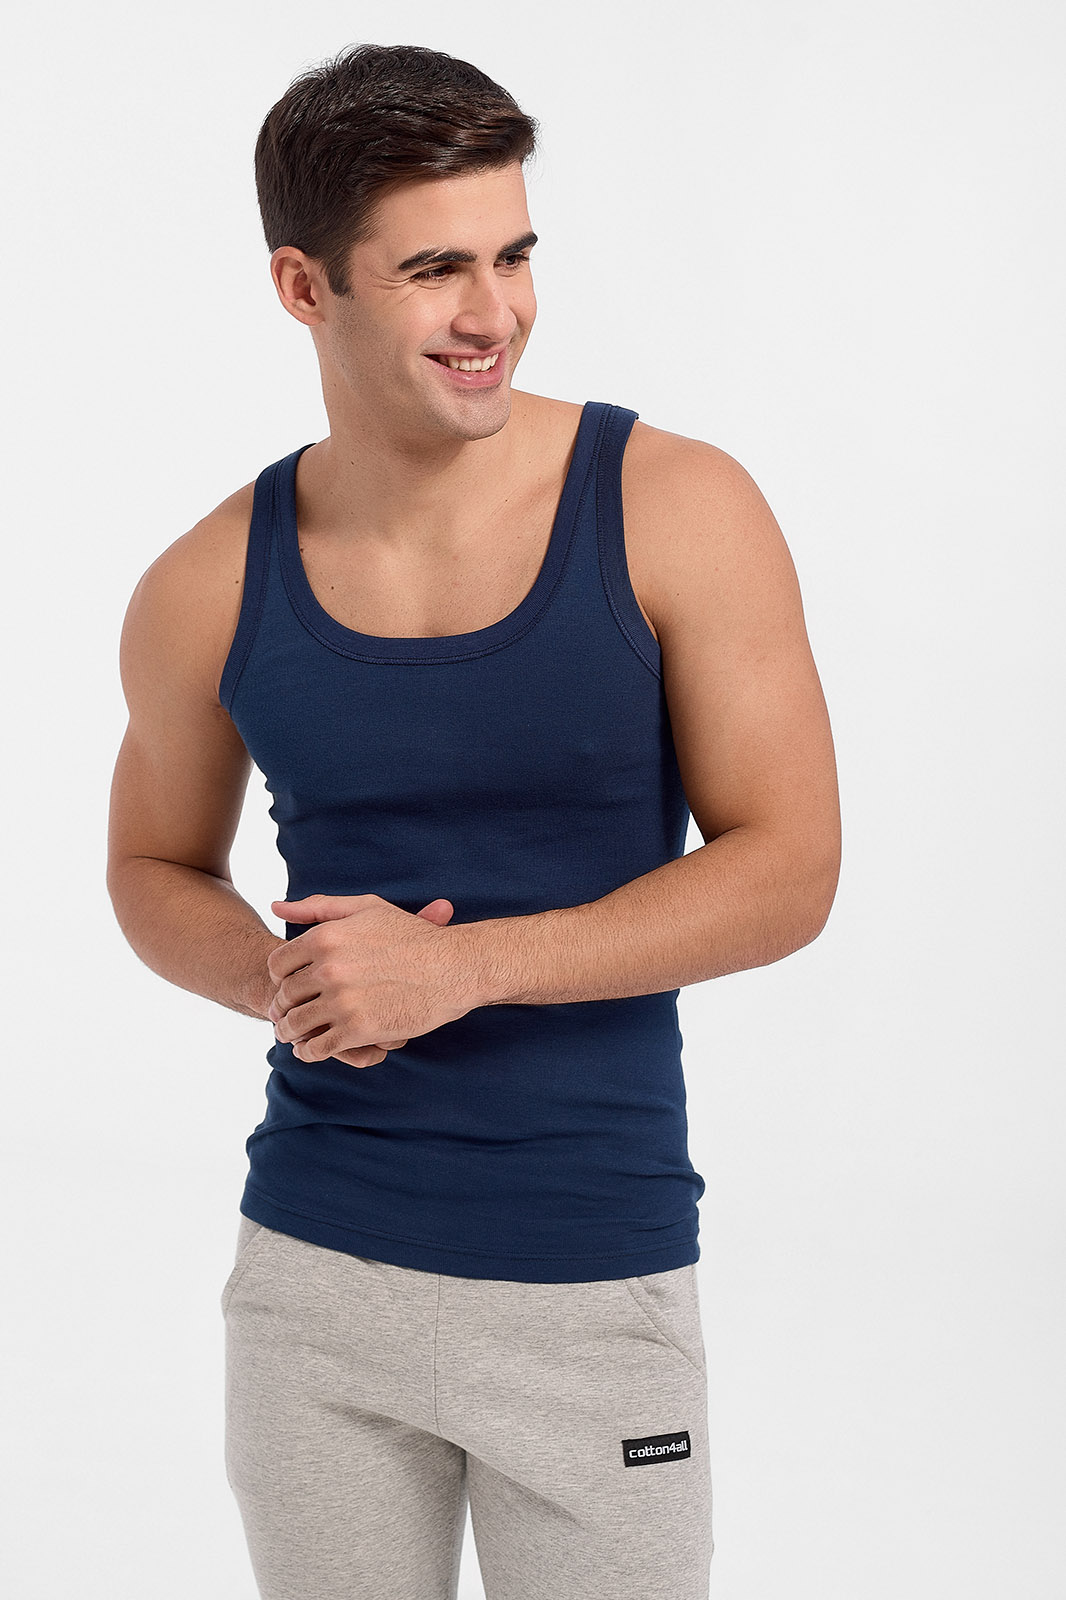 Mens GIORGIO Undershirt with straps - 100% Cotton from S to 4XL